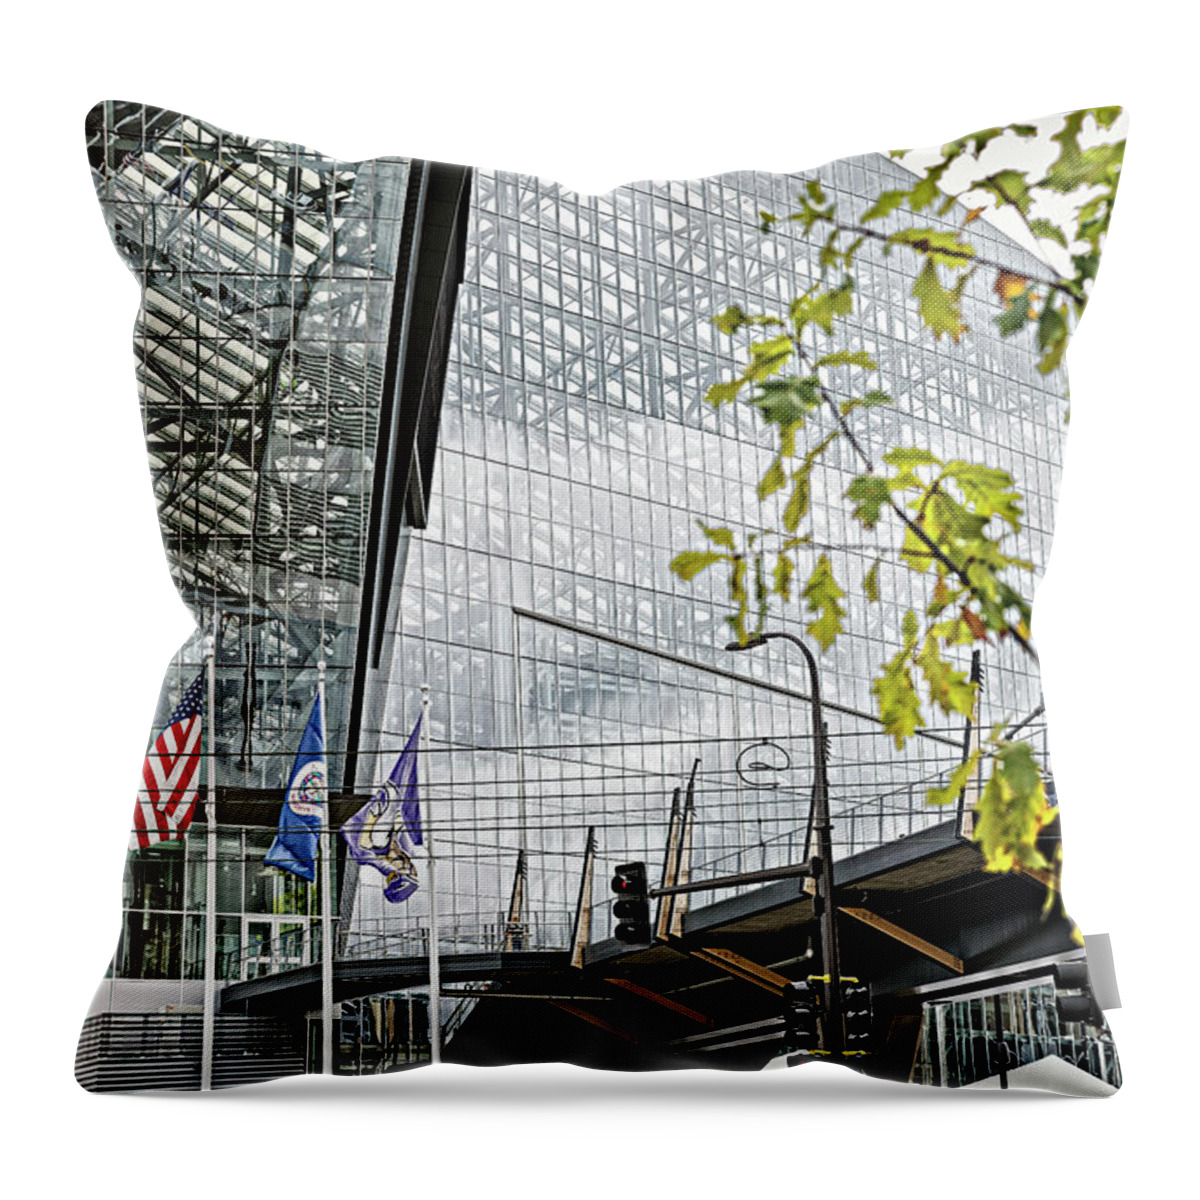 Us Bank Stadium Throw Pillow featuring the photograph The Vikings New Stadium by Susan Stone